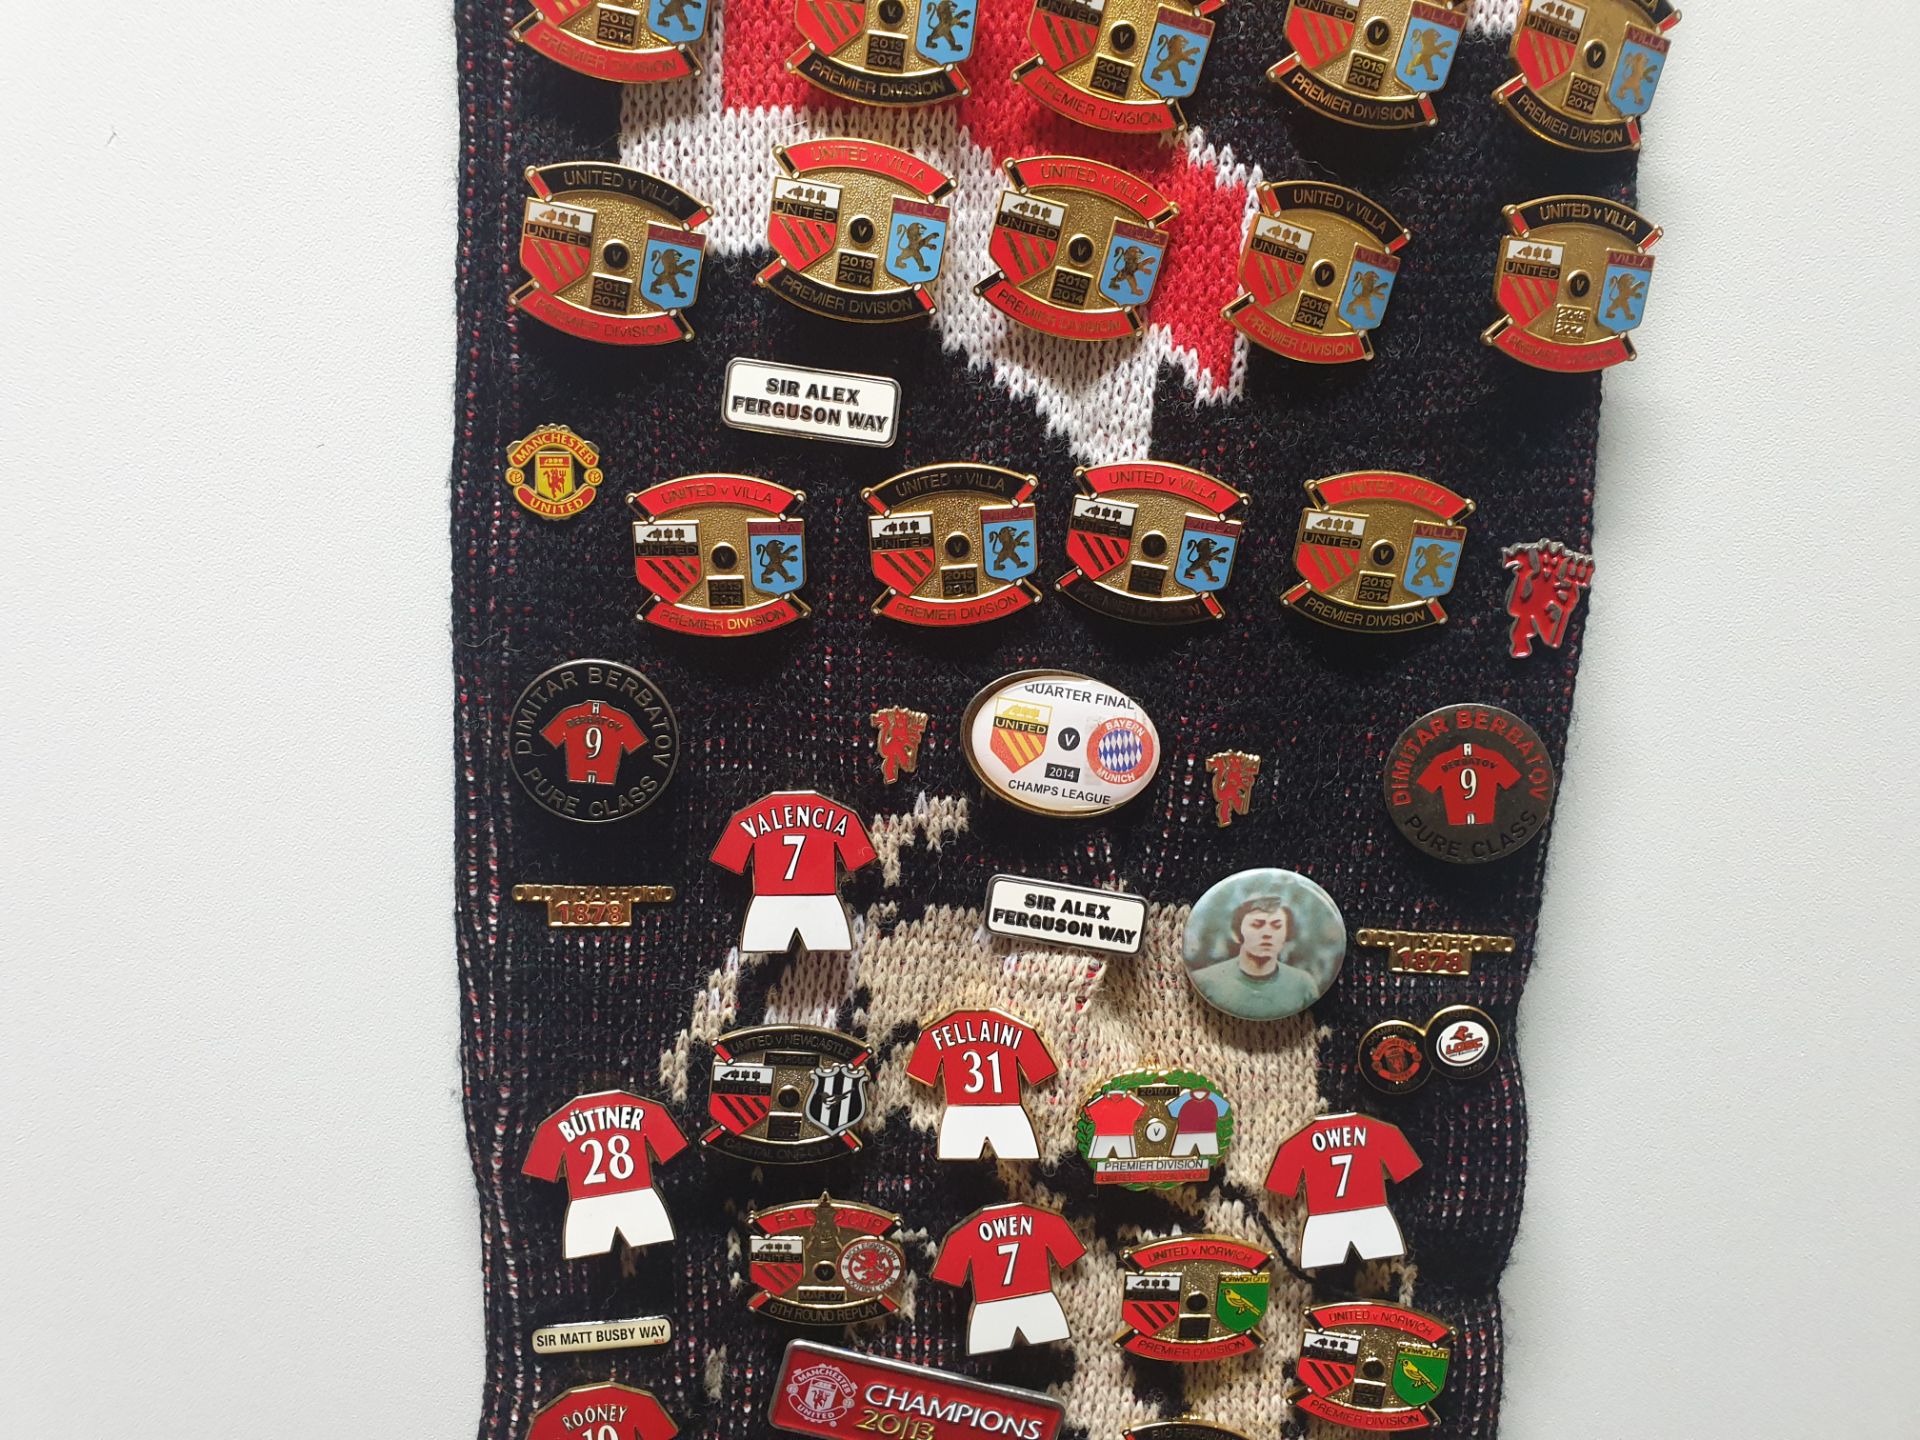 MANCHESTER UNITED SCARF CONTAINING APPROX 170 X PIN BADGES IE CHAMPIONS 2013, SIR ALEX FERGUSON WAY, - Image 7 of 8